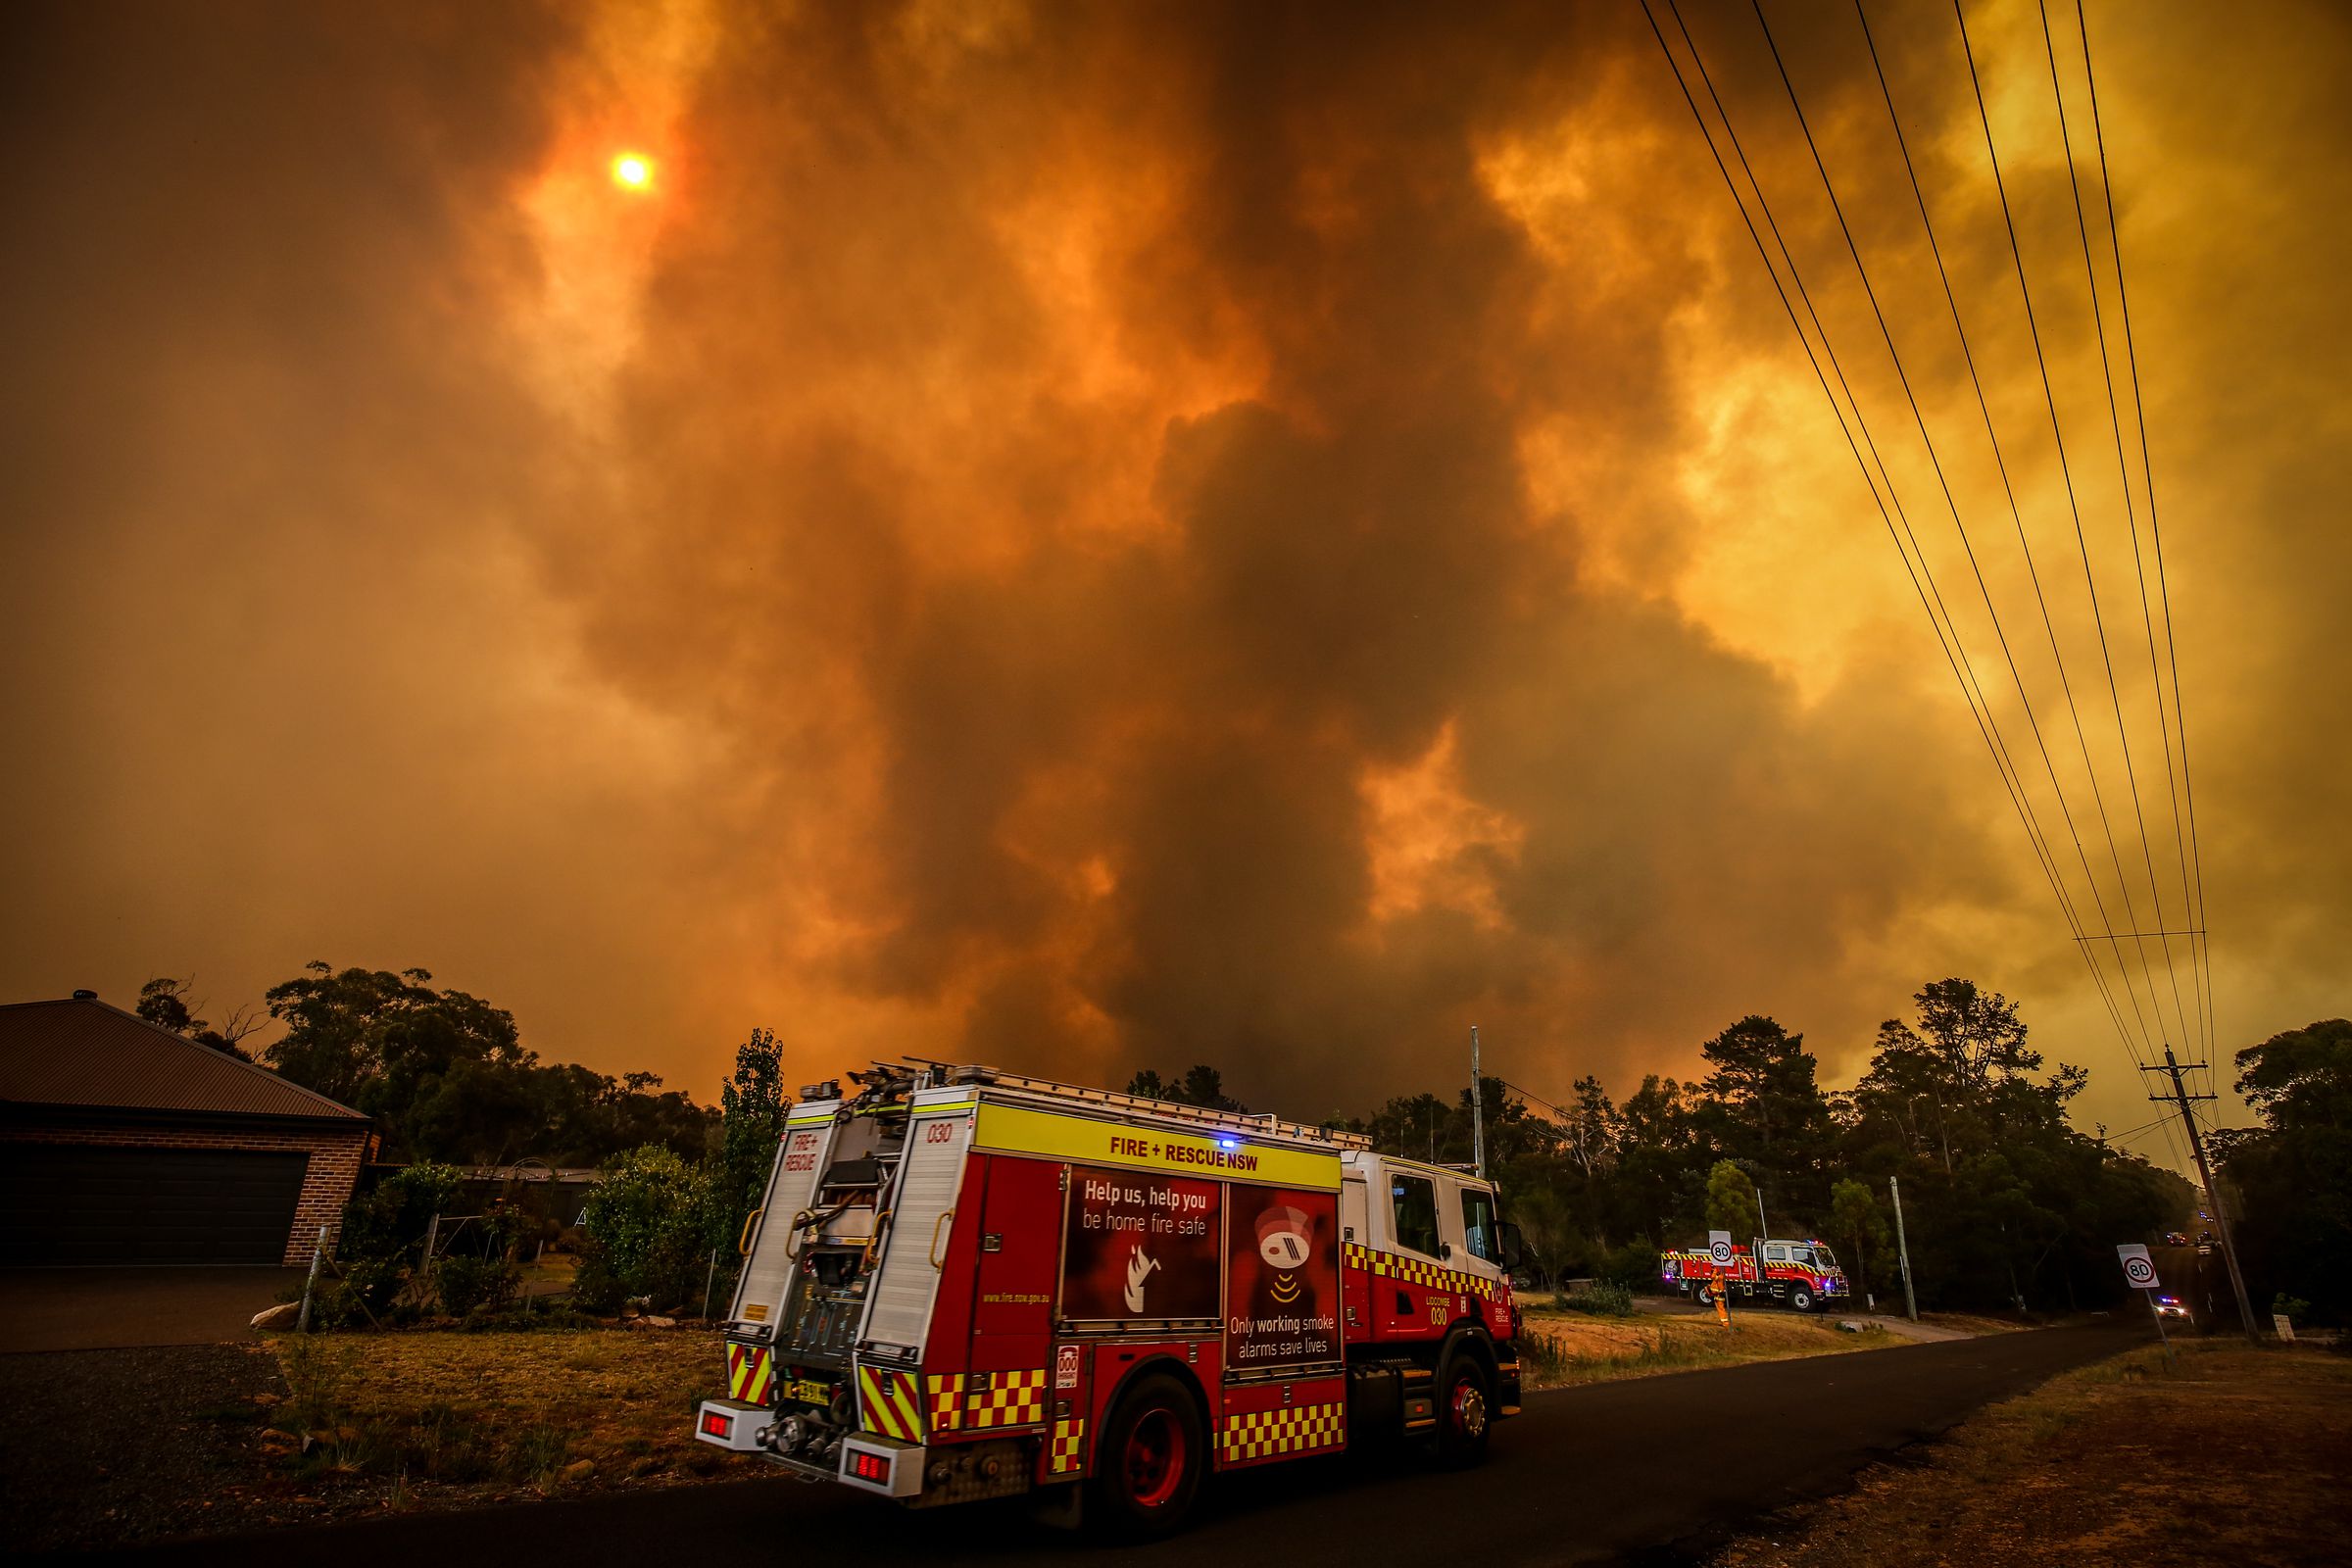 Firefighters Continue To Battle Bushfires As Catastrophic Fire Danger Warning Is Issued In NSW